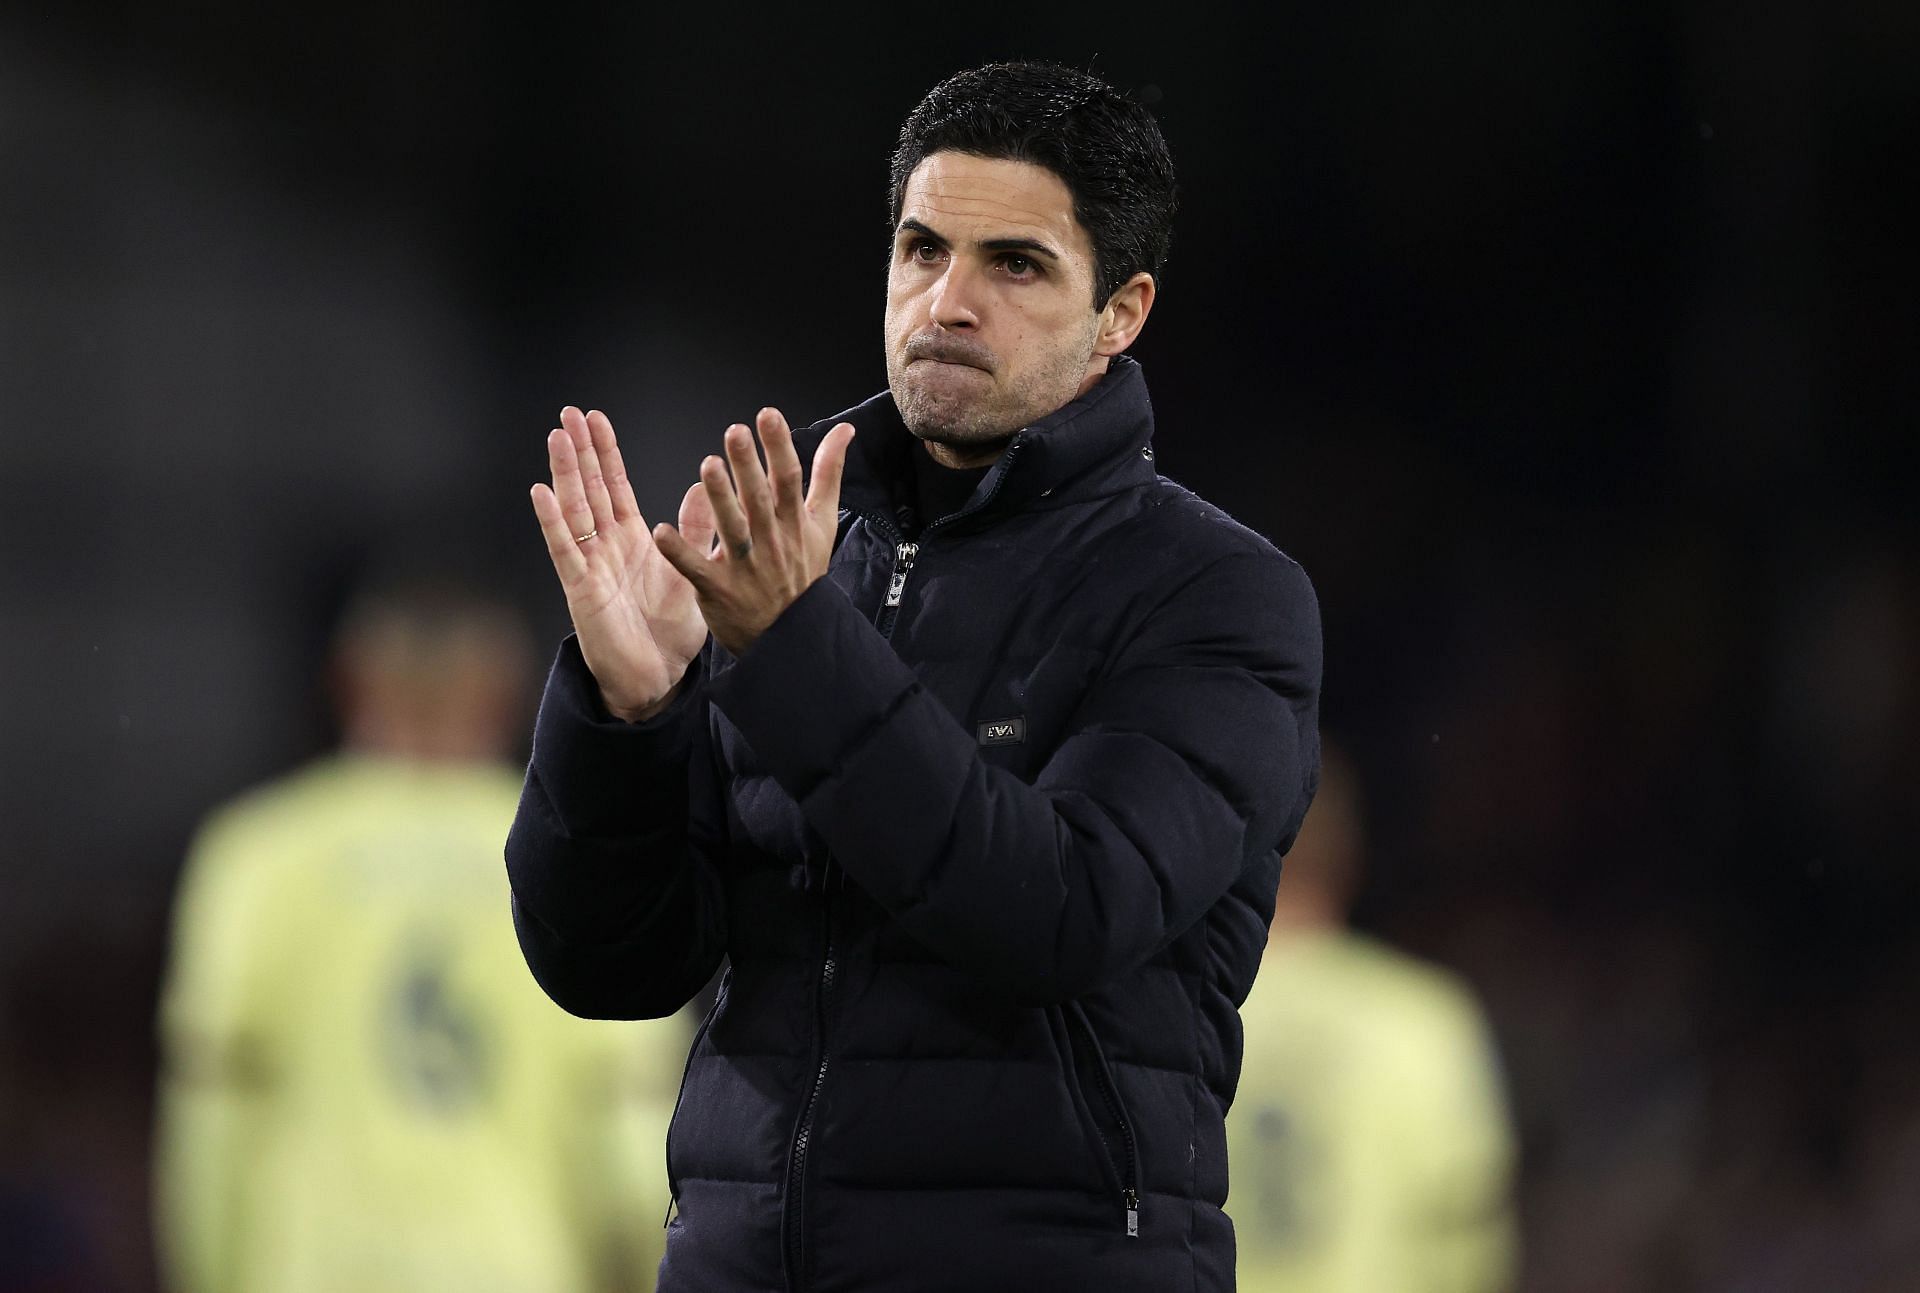 Gunners manager Mikel Arteta has started the new season with a win.